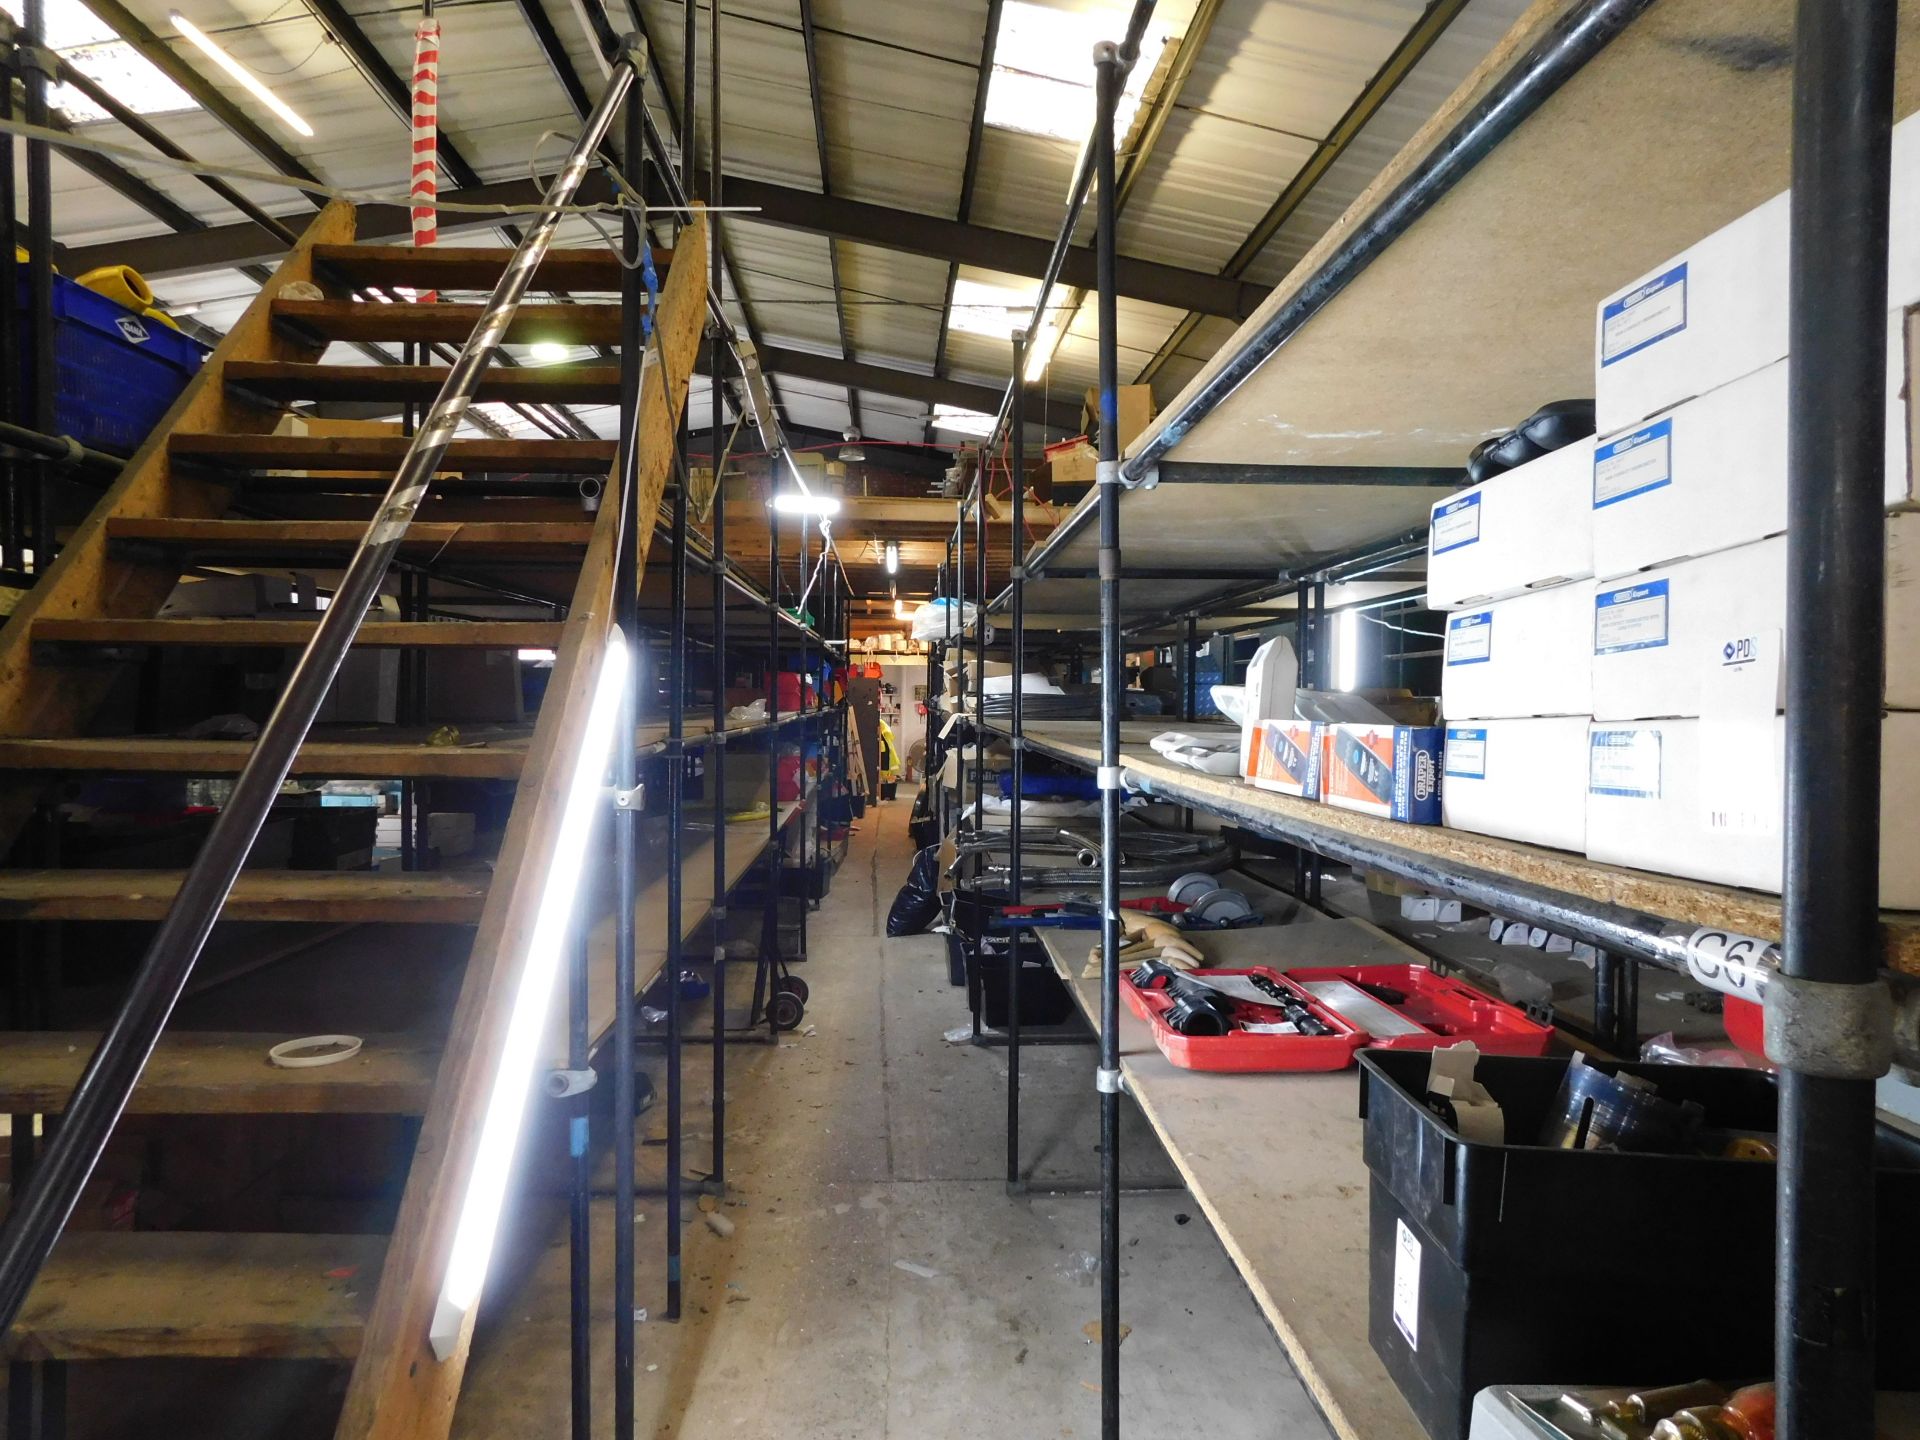 Tubular Steel Shelving Throughout Ground Floor comprising of 57 Bays & Quantity of Decommissioned ( - Image 5 of 6